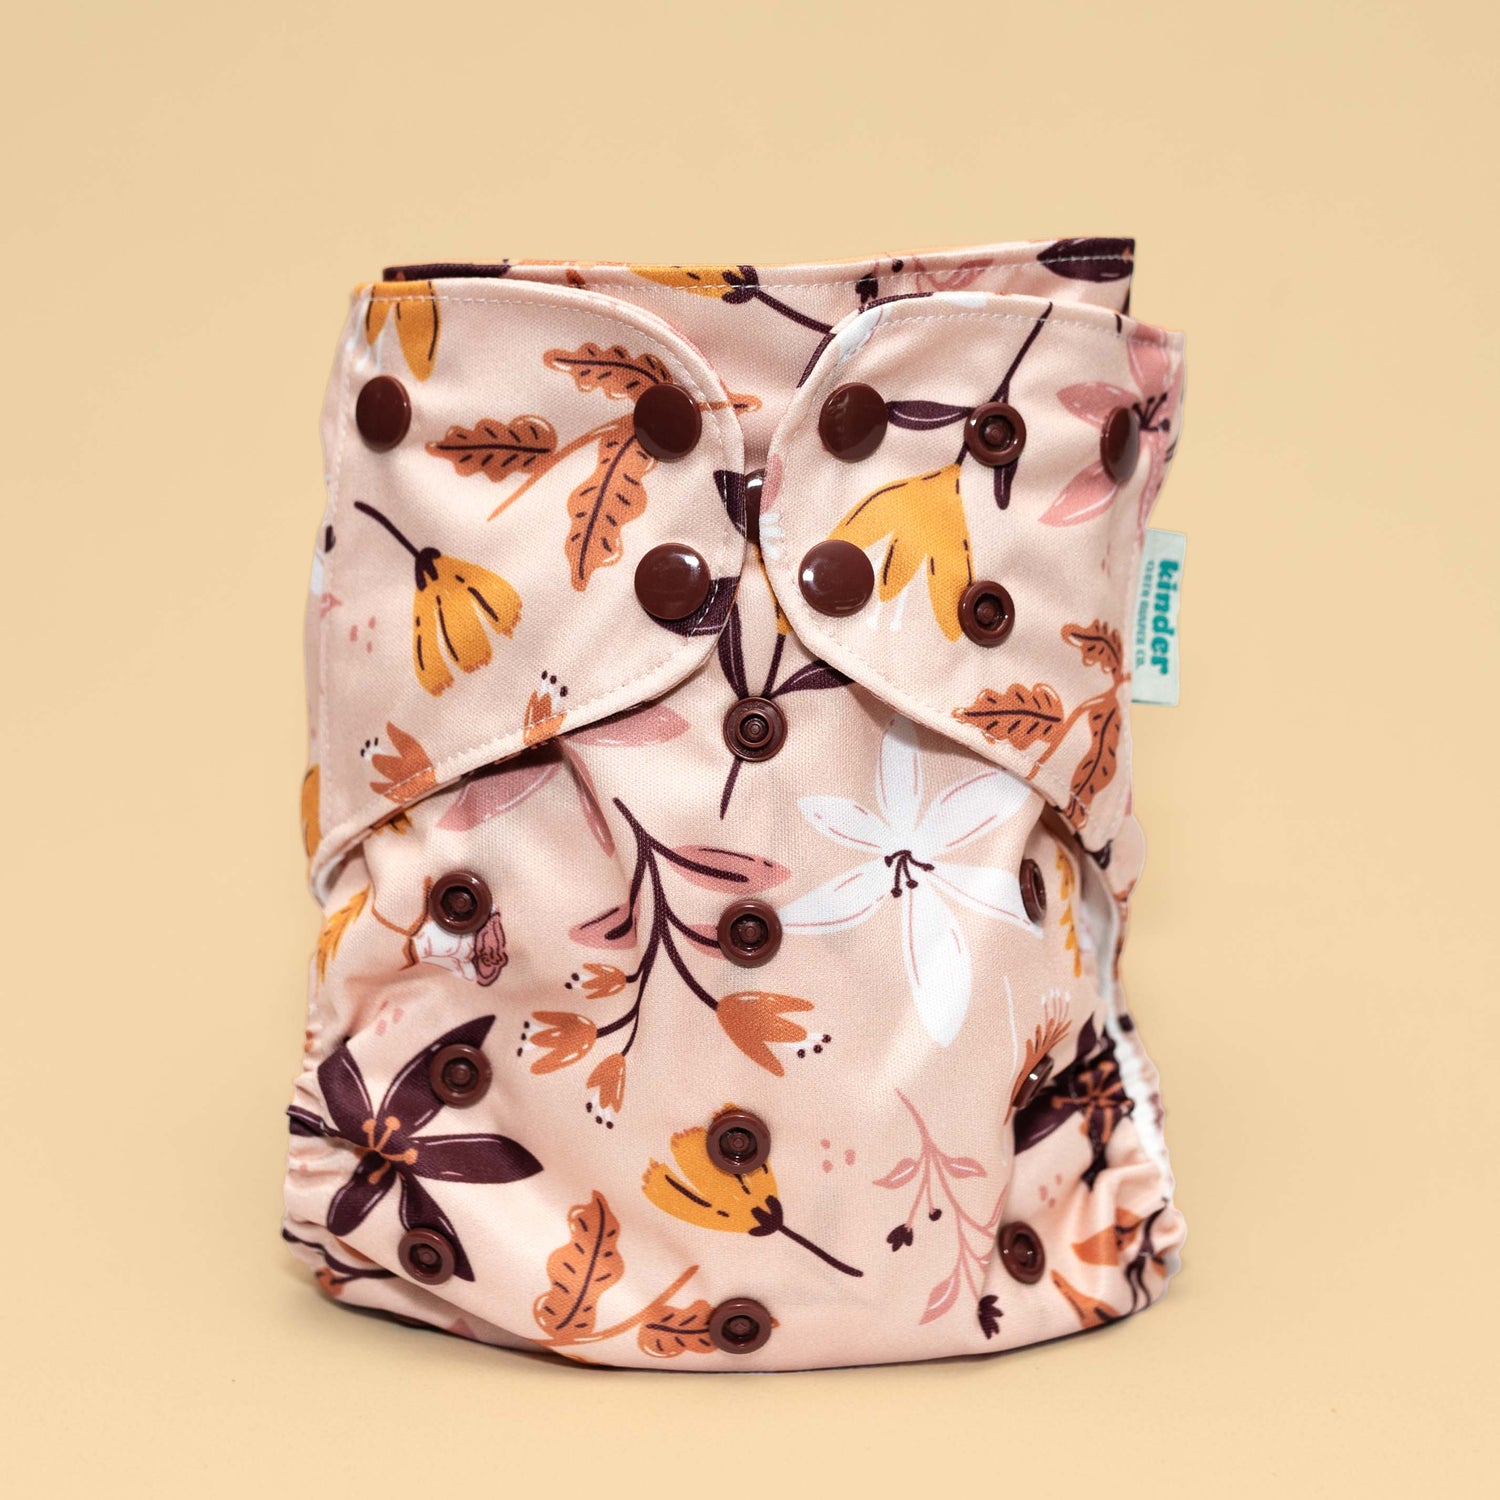 floral printed the best modern reusable pocket cloth diaper washable diaper athletic wicking jersey reusable nappy reusable diaper lightweight easy to use diaper viral cloth diaper